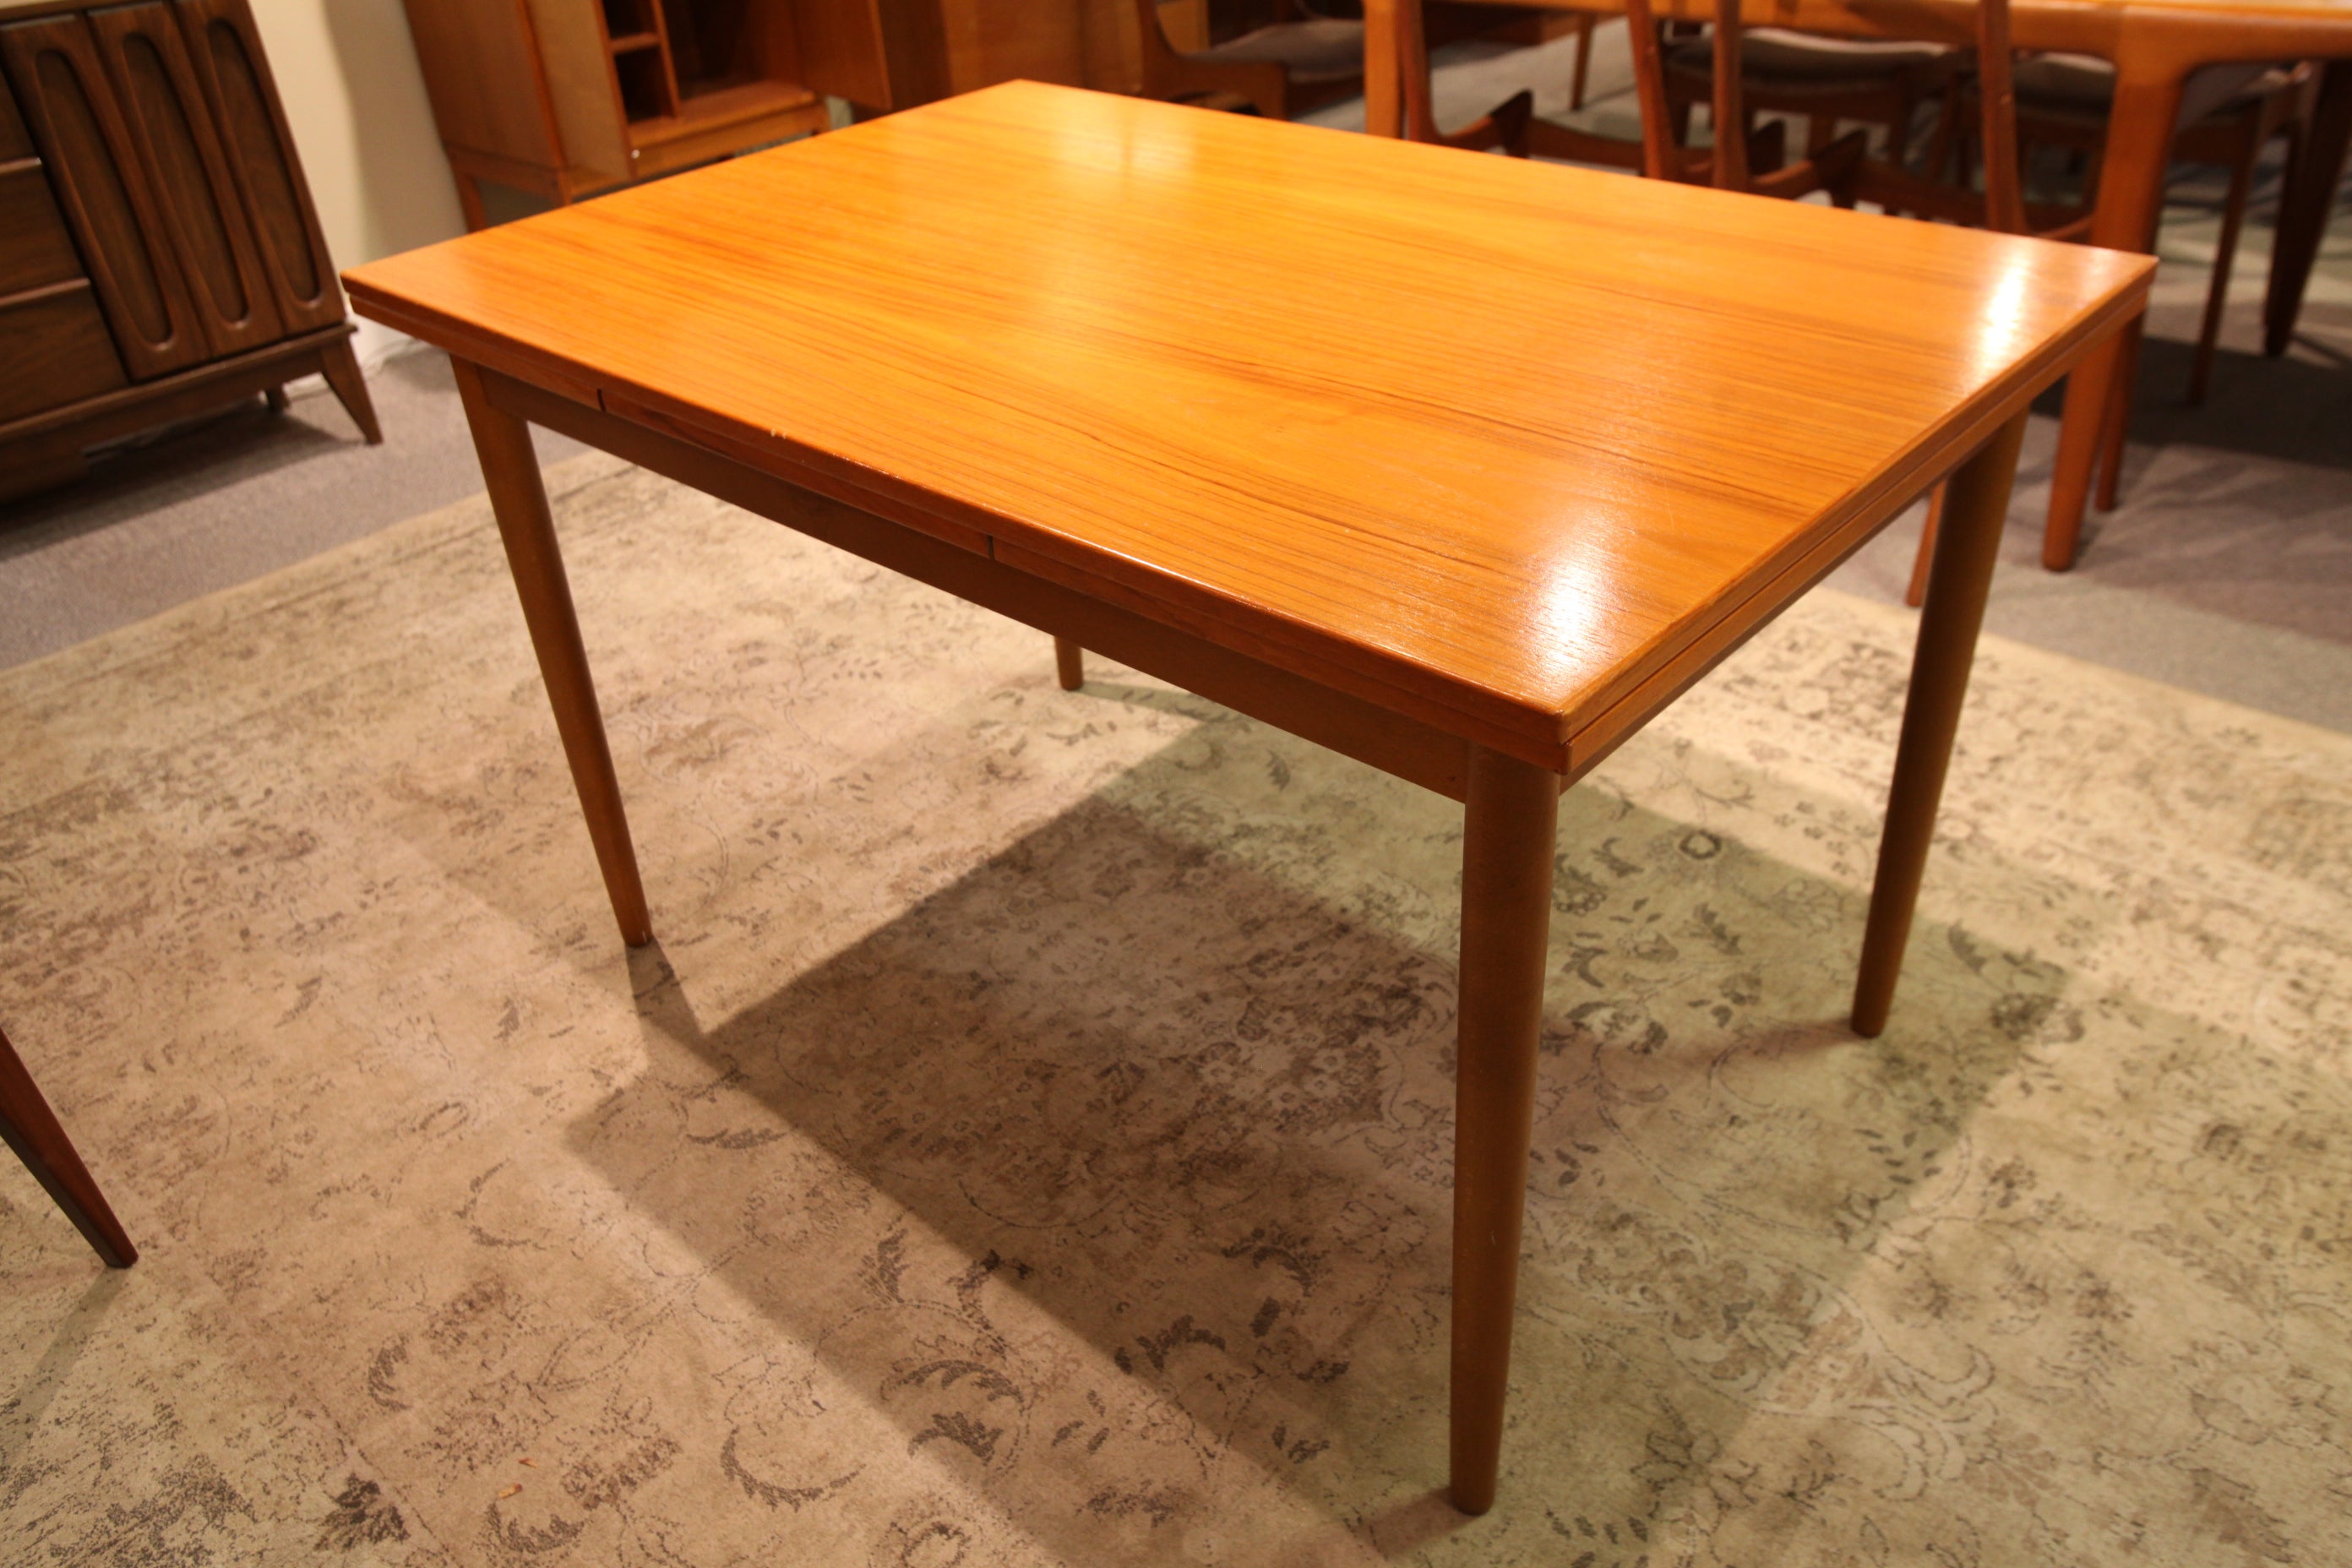 Danish Teak Extension Table by FARSTRUP (79" x 32") or (48" x 32")